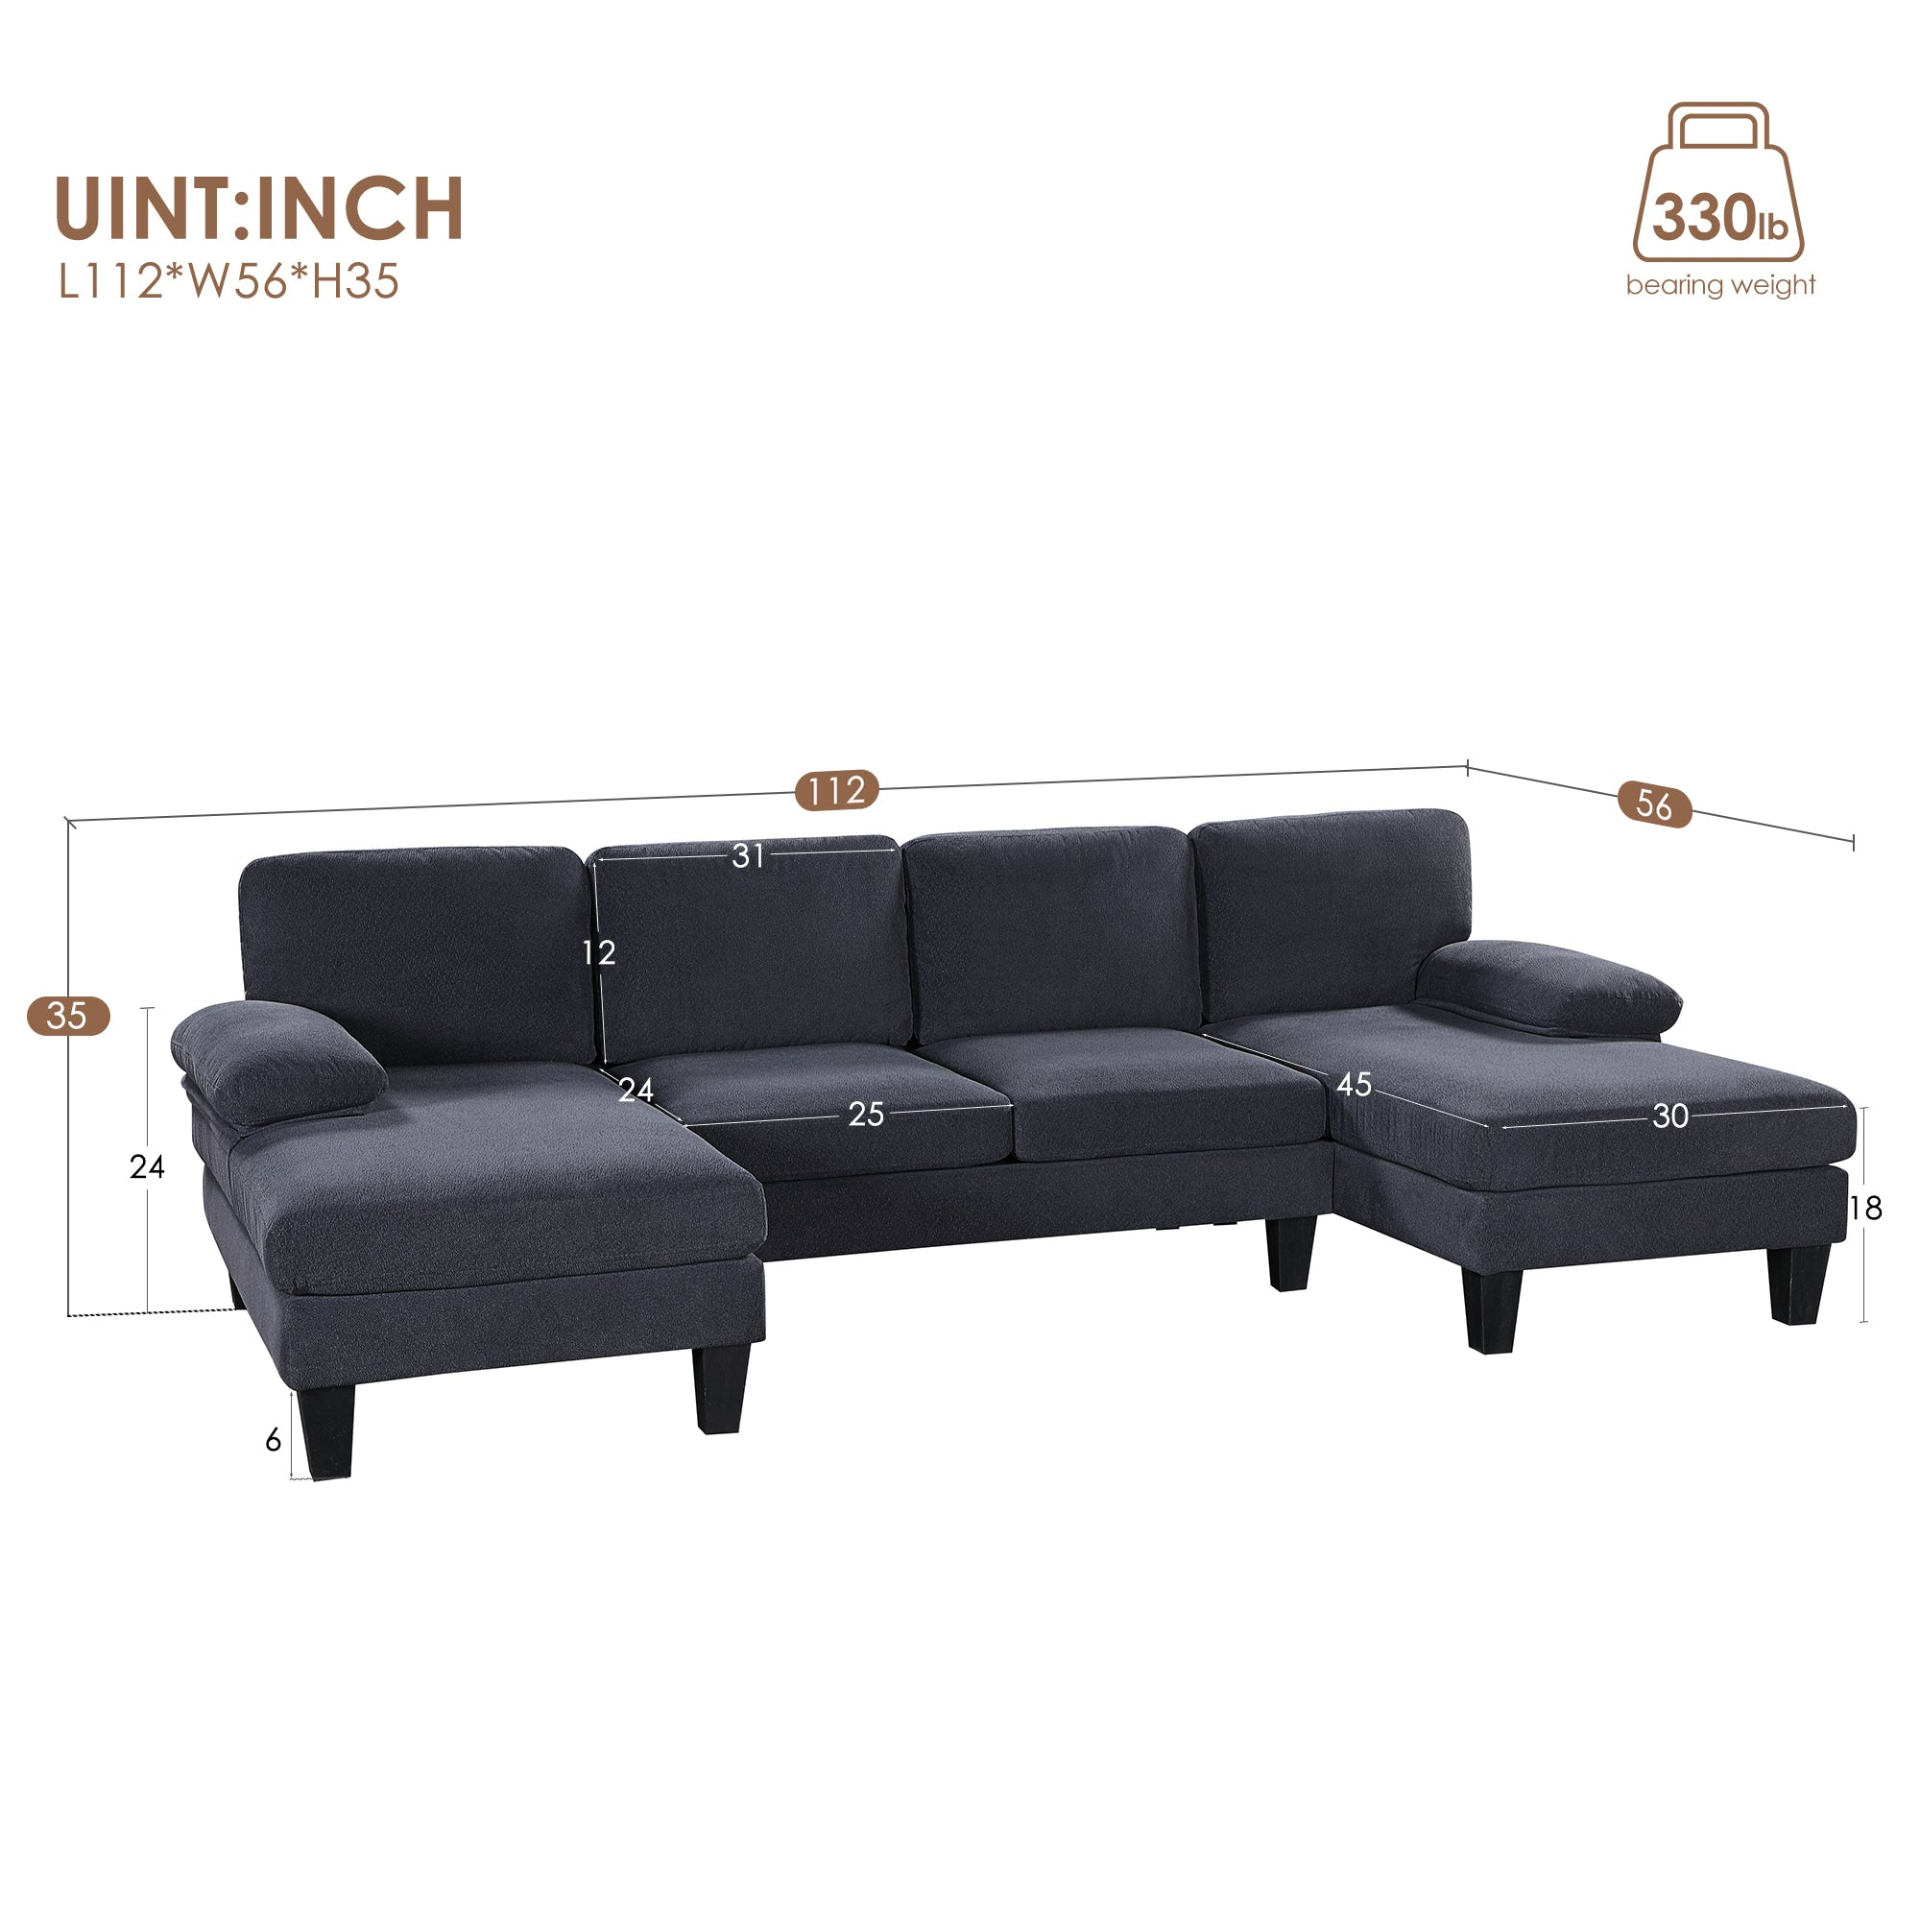 Dark Grey - Luxe Lounge: 6 - Seat U-Shaped Granular Velvet Sofa With Double Chaise (112" x 56")